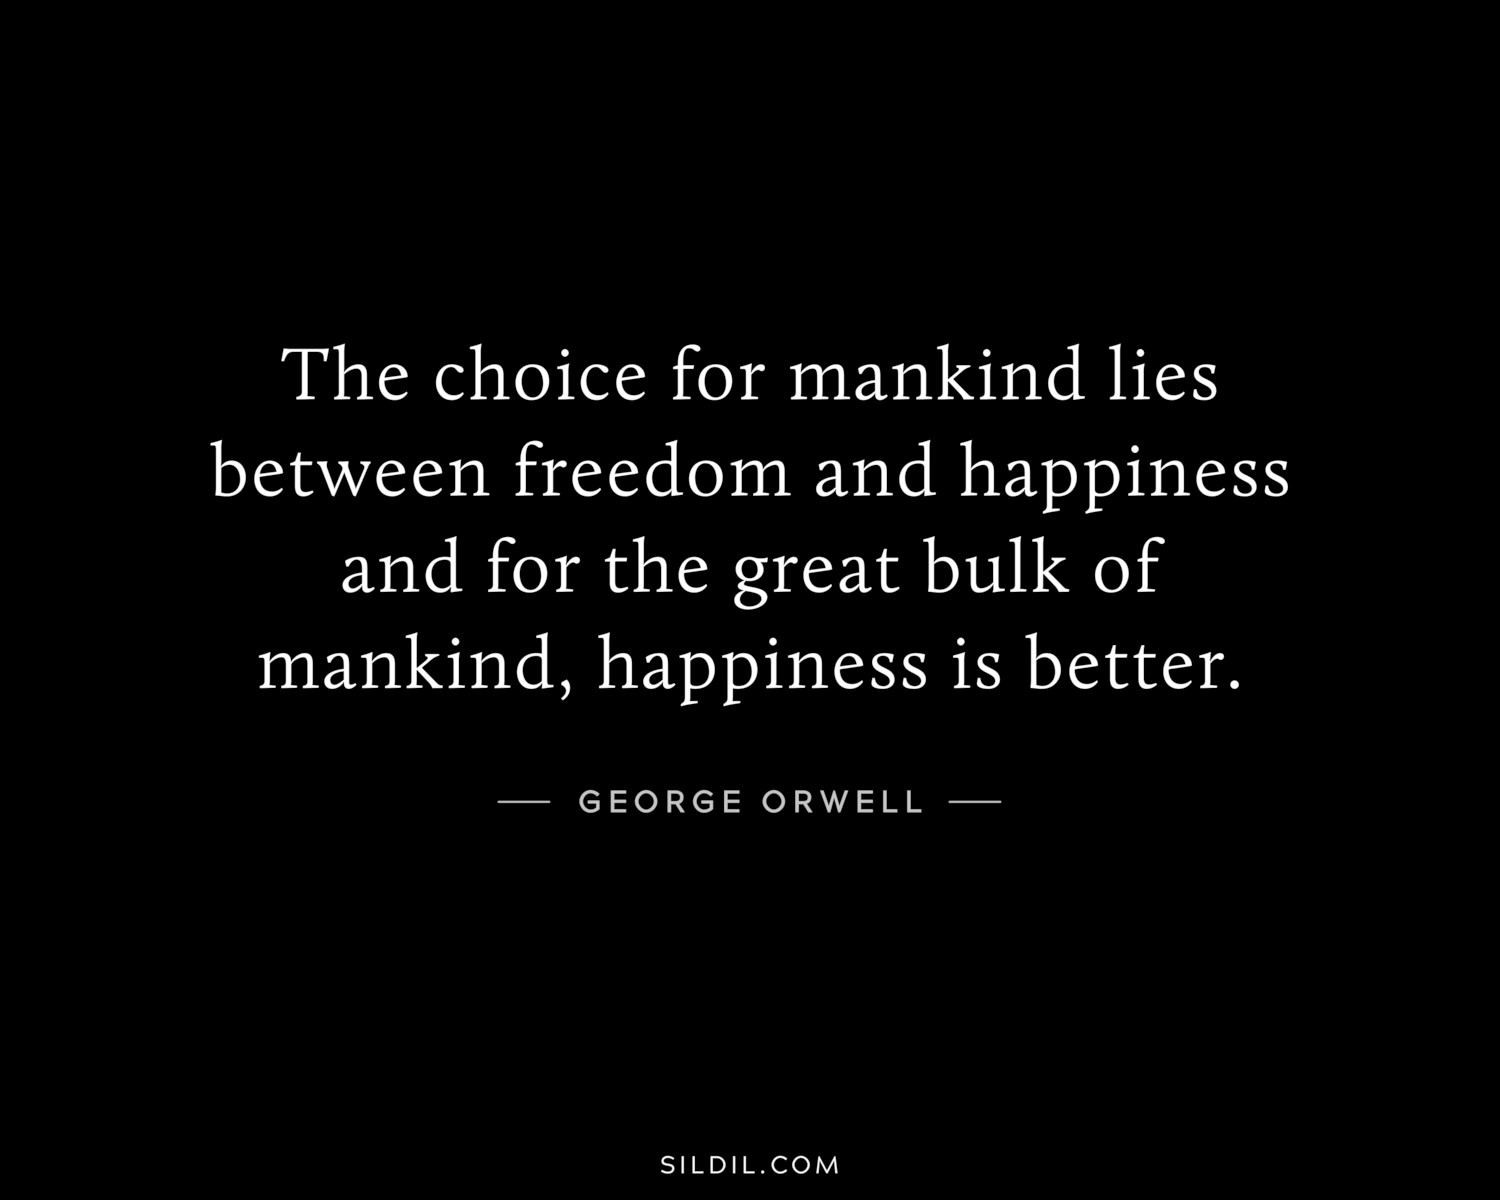 The choice for mankind lies between freedom and happiness and for the great bulk of mankind, happiness is better.